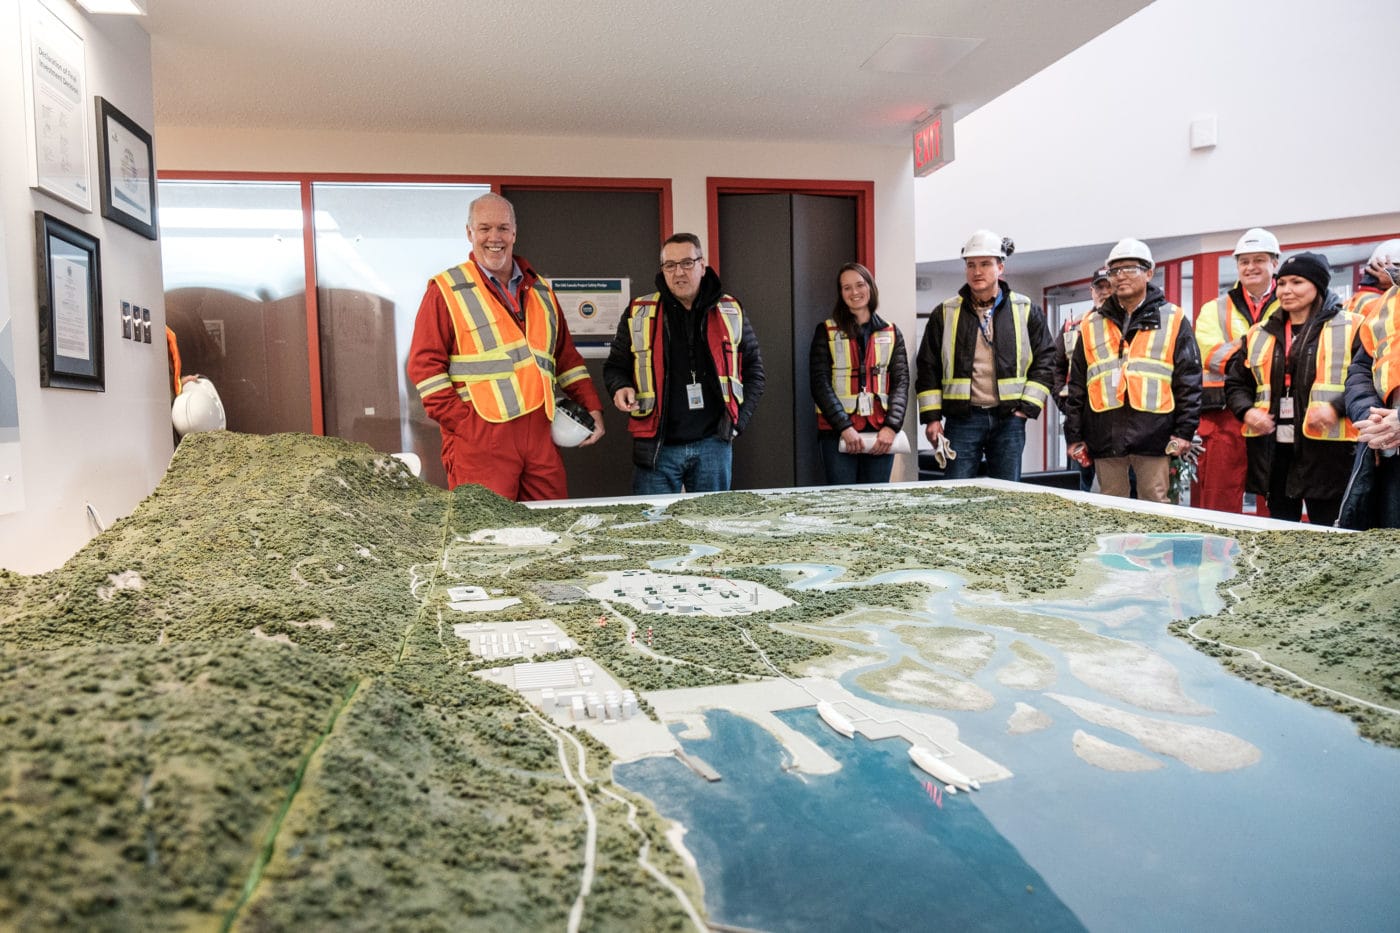 B.C. Premier John Horgan tours the site of the LNG Canada project in Kitimat, B.C., in January 2020. The proposed floating Cedar LNG facility is planned for a site adjacent to the LNG Canada export terminal. Photo: Province of B.C. / Flickr